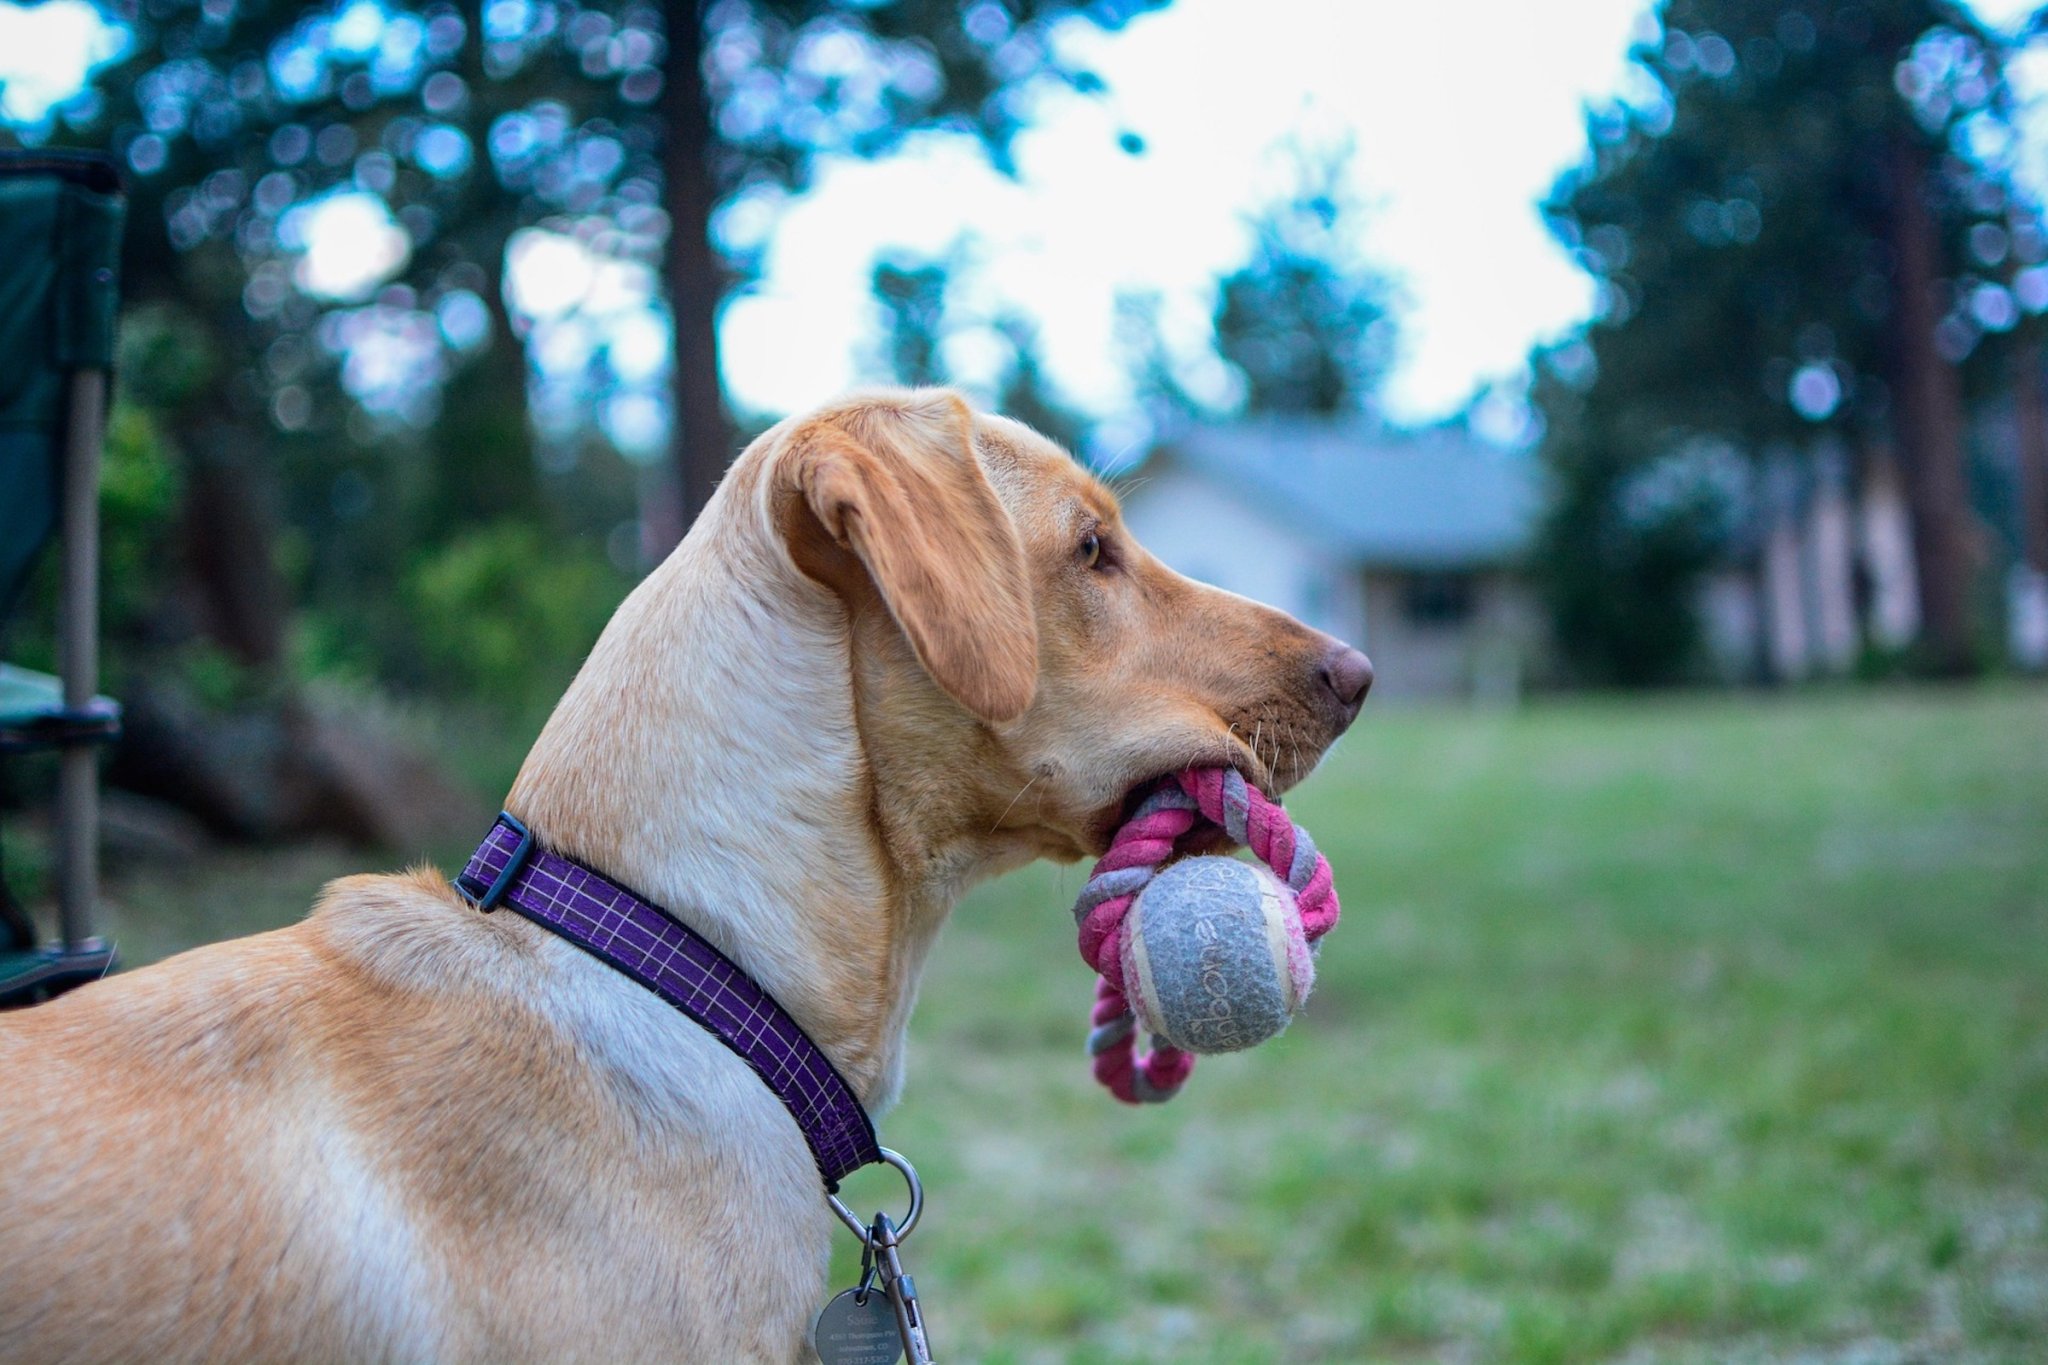 How to teach a dog to fetch in 5 easy steps